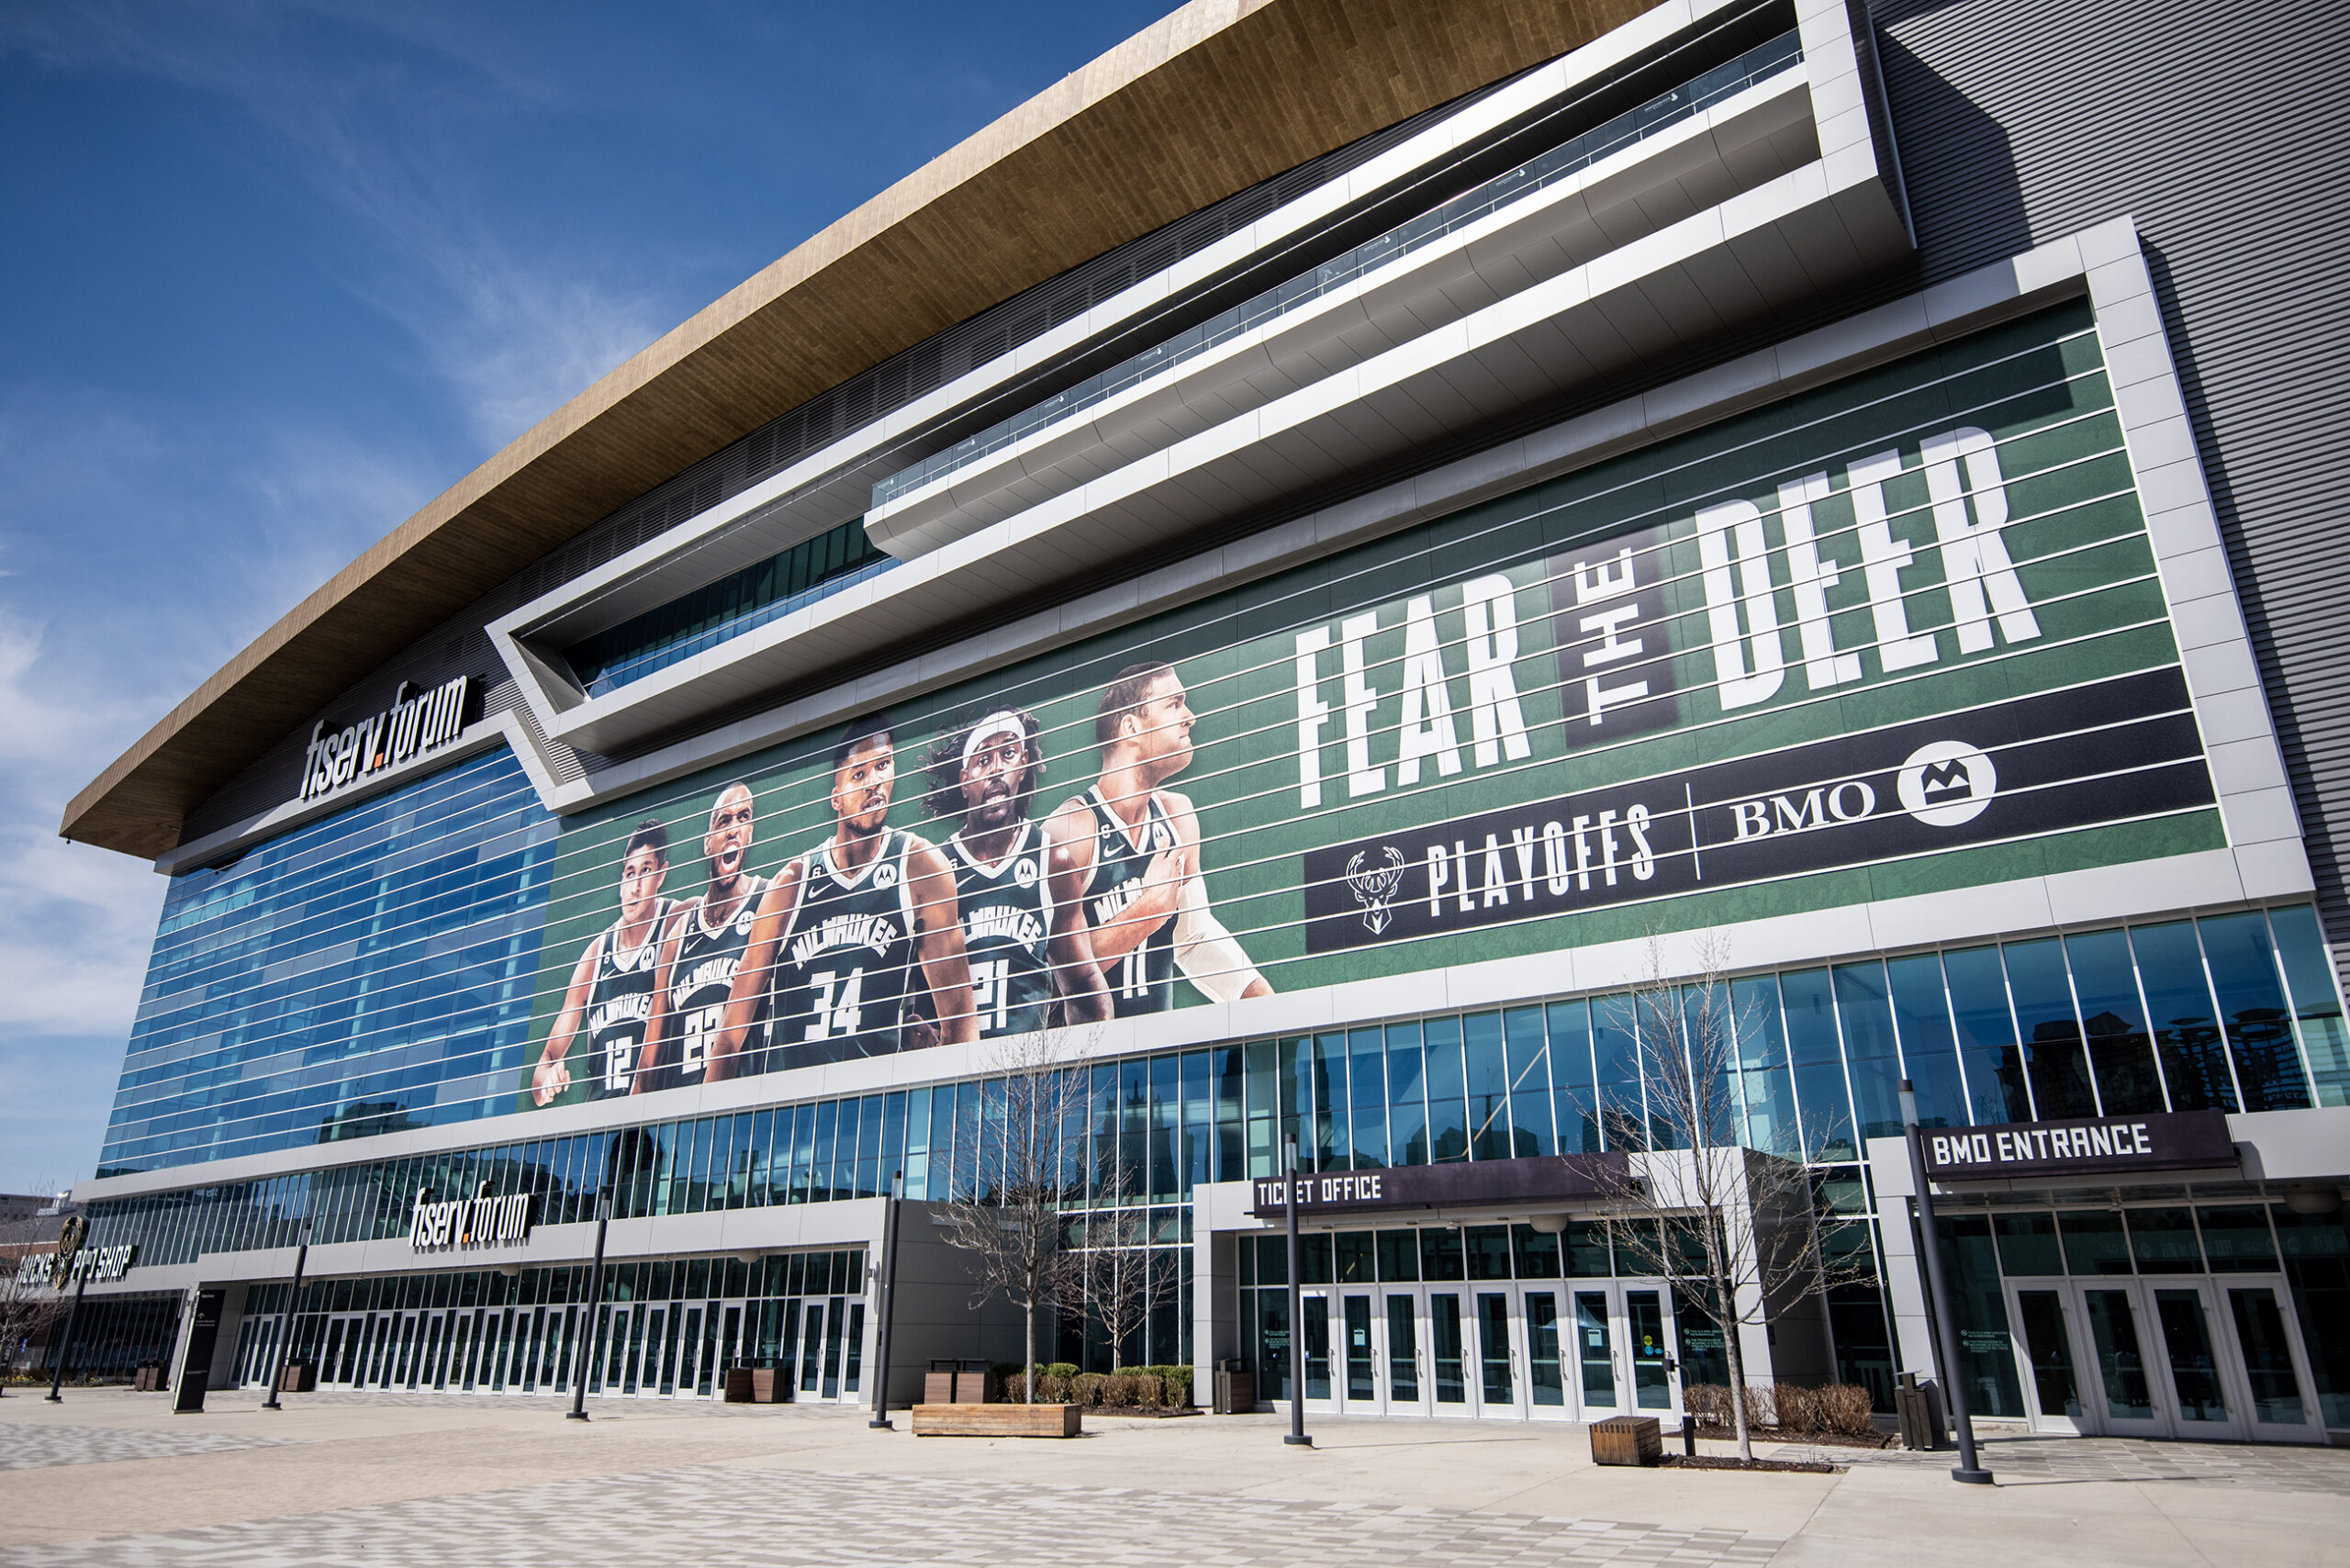 A blue sky is seen behind the curved roof of the Fiserv Forum. Images of 5 players next to the phrase "Fear the deer" are displayed above the stadium's front doors.